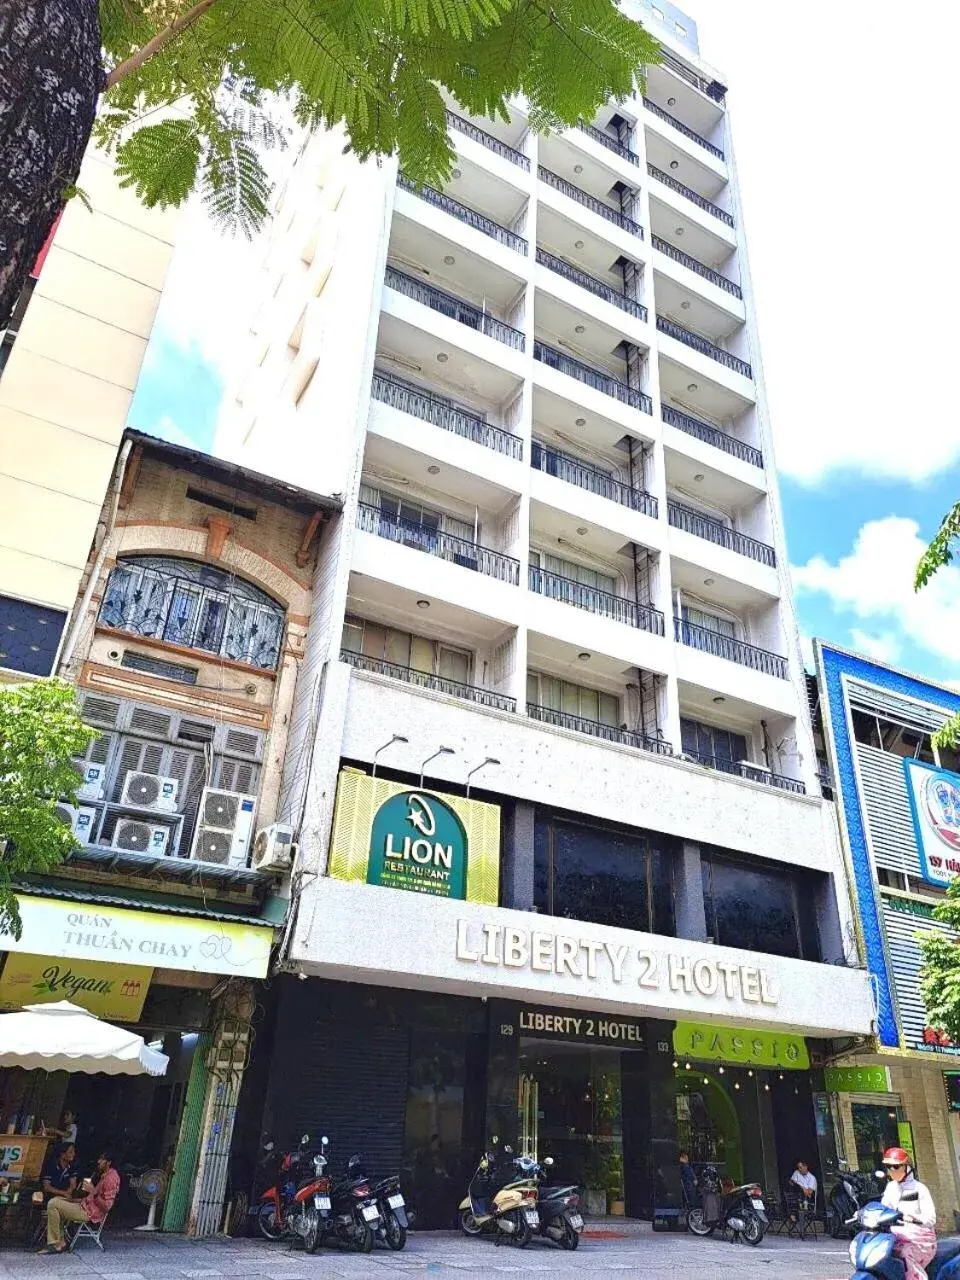 Property Building in Liberty 2 Hotel